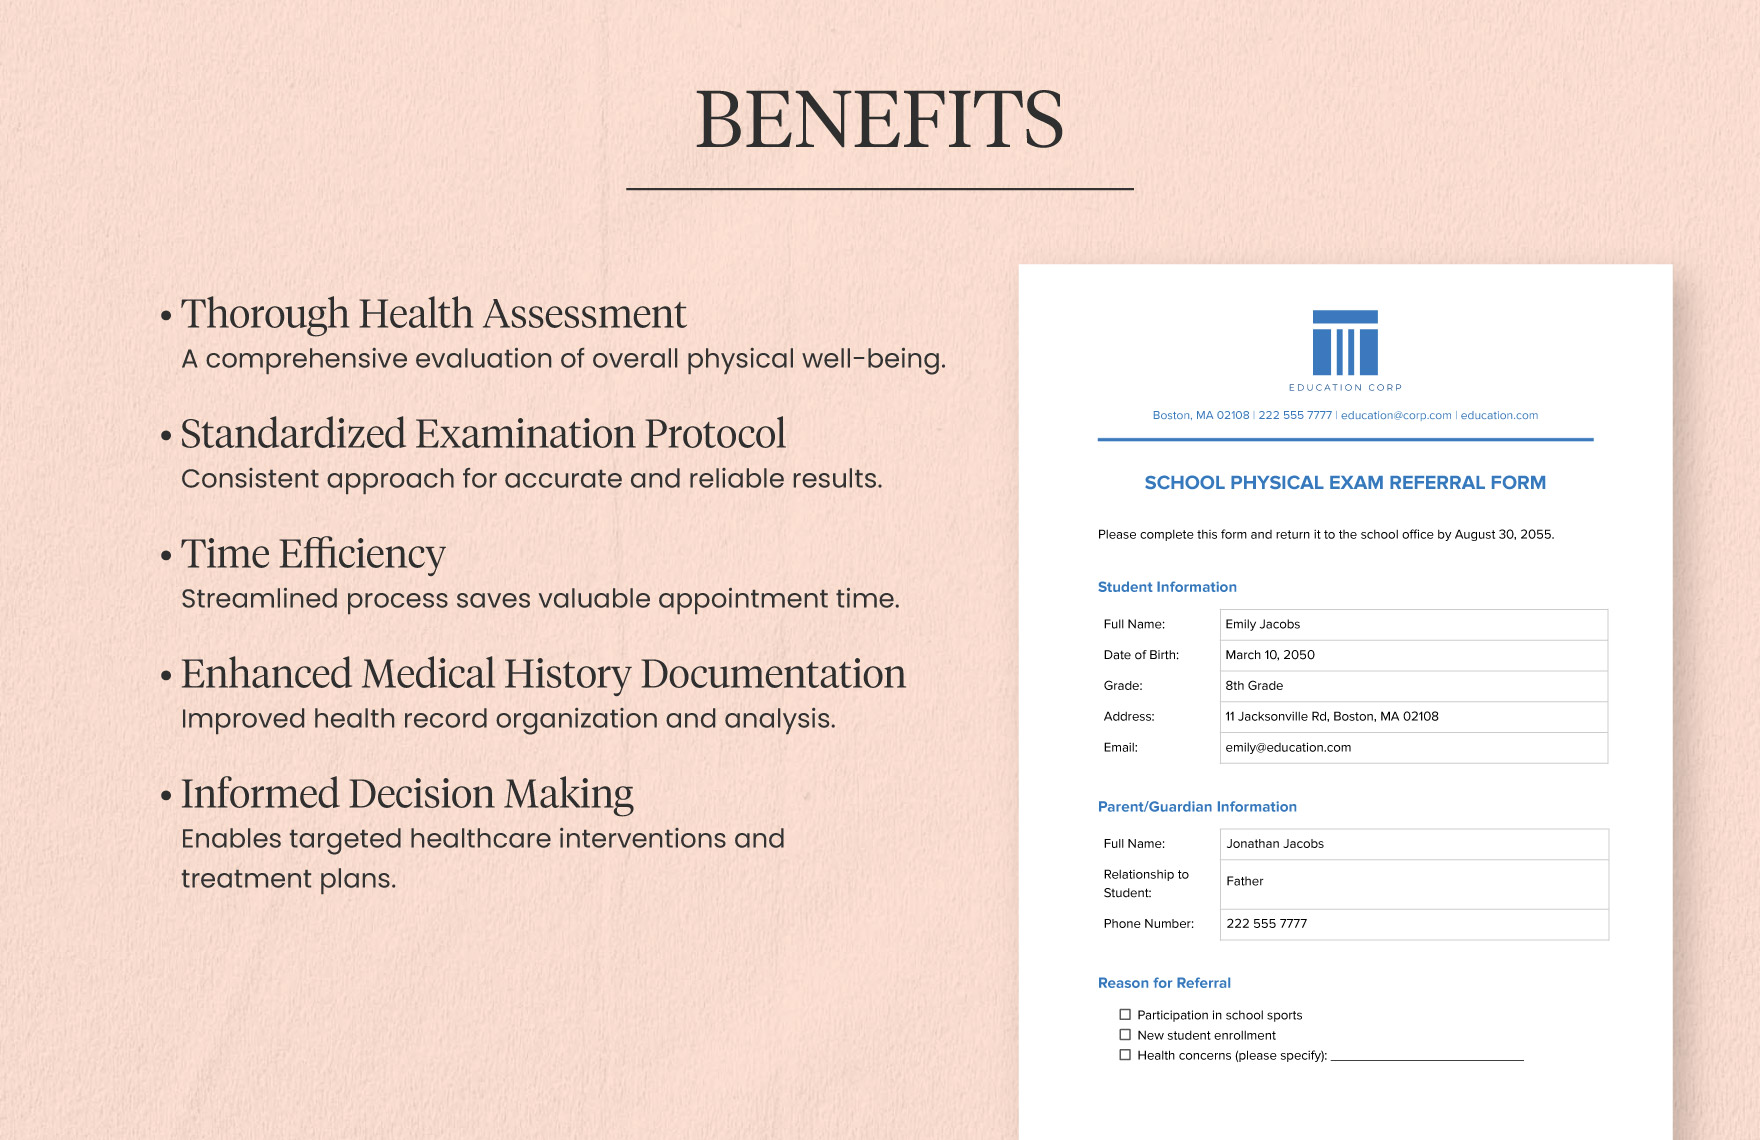 School Physical Exam Referral Form Template